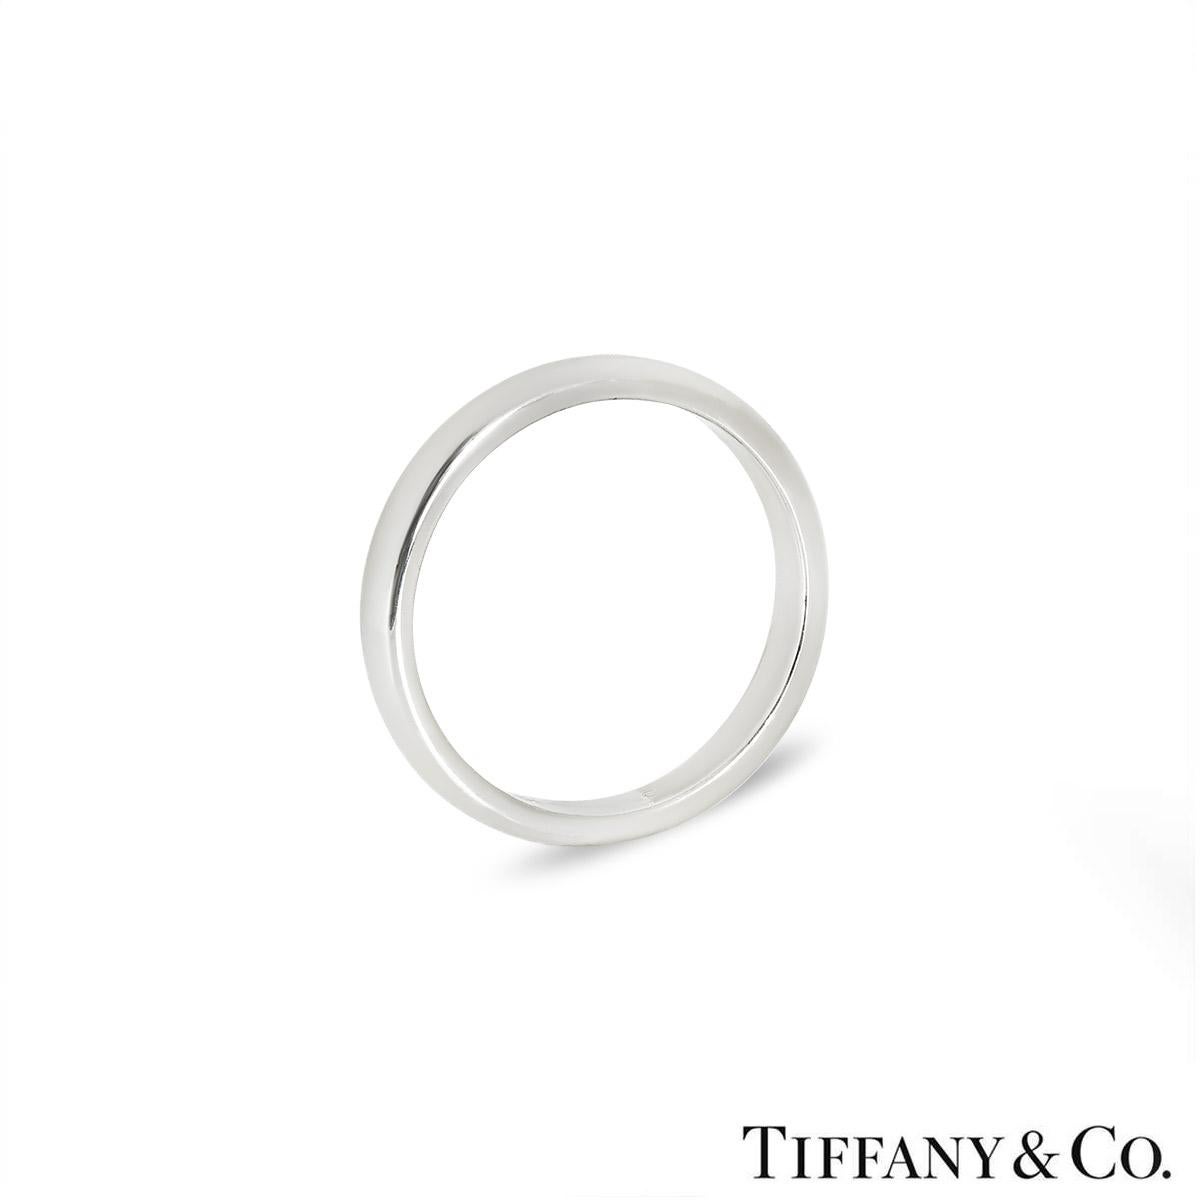 A classic platinum wedding band ring by Tiffany & Co. from the Tiffany Forever collection. The unisex band measures 3mm in width, has a gross weight of 4.85 grams and is currently a size UK L½ - EU 51½ but can be adjusted for the perfect fit.

Comes